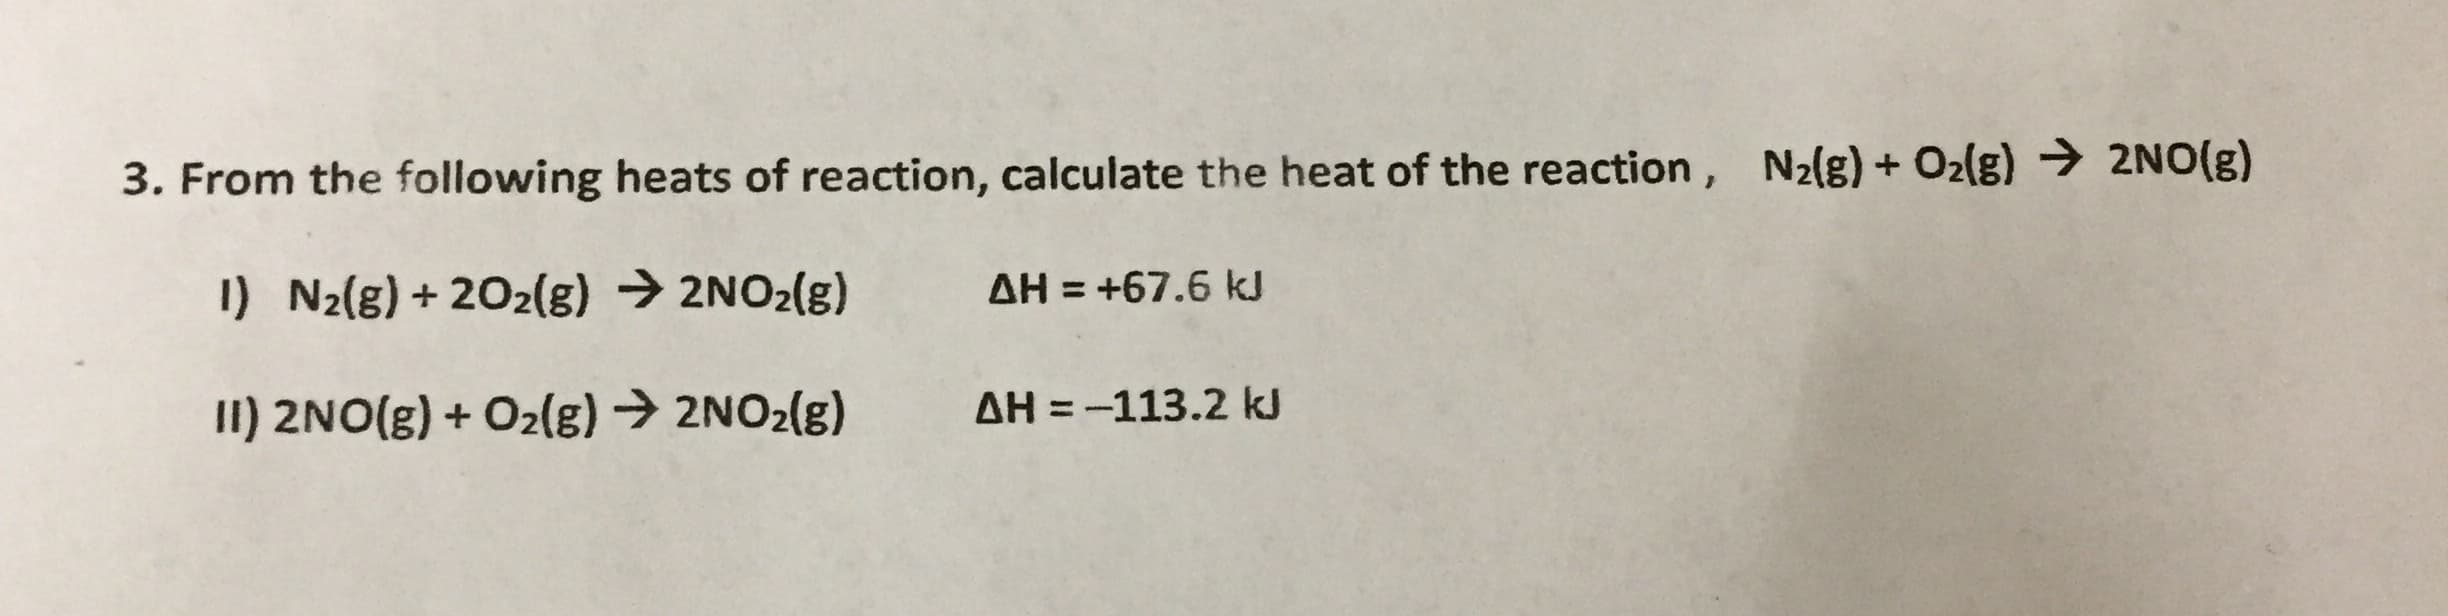 3. From the following heats of reaction, calculate the heat of the reaction, N21g)+ O2lg) 2NO(E)
1)
N2(g) + 202(g)
2NO2(g)
ΔΗ
+67.6 kJ
